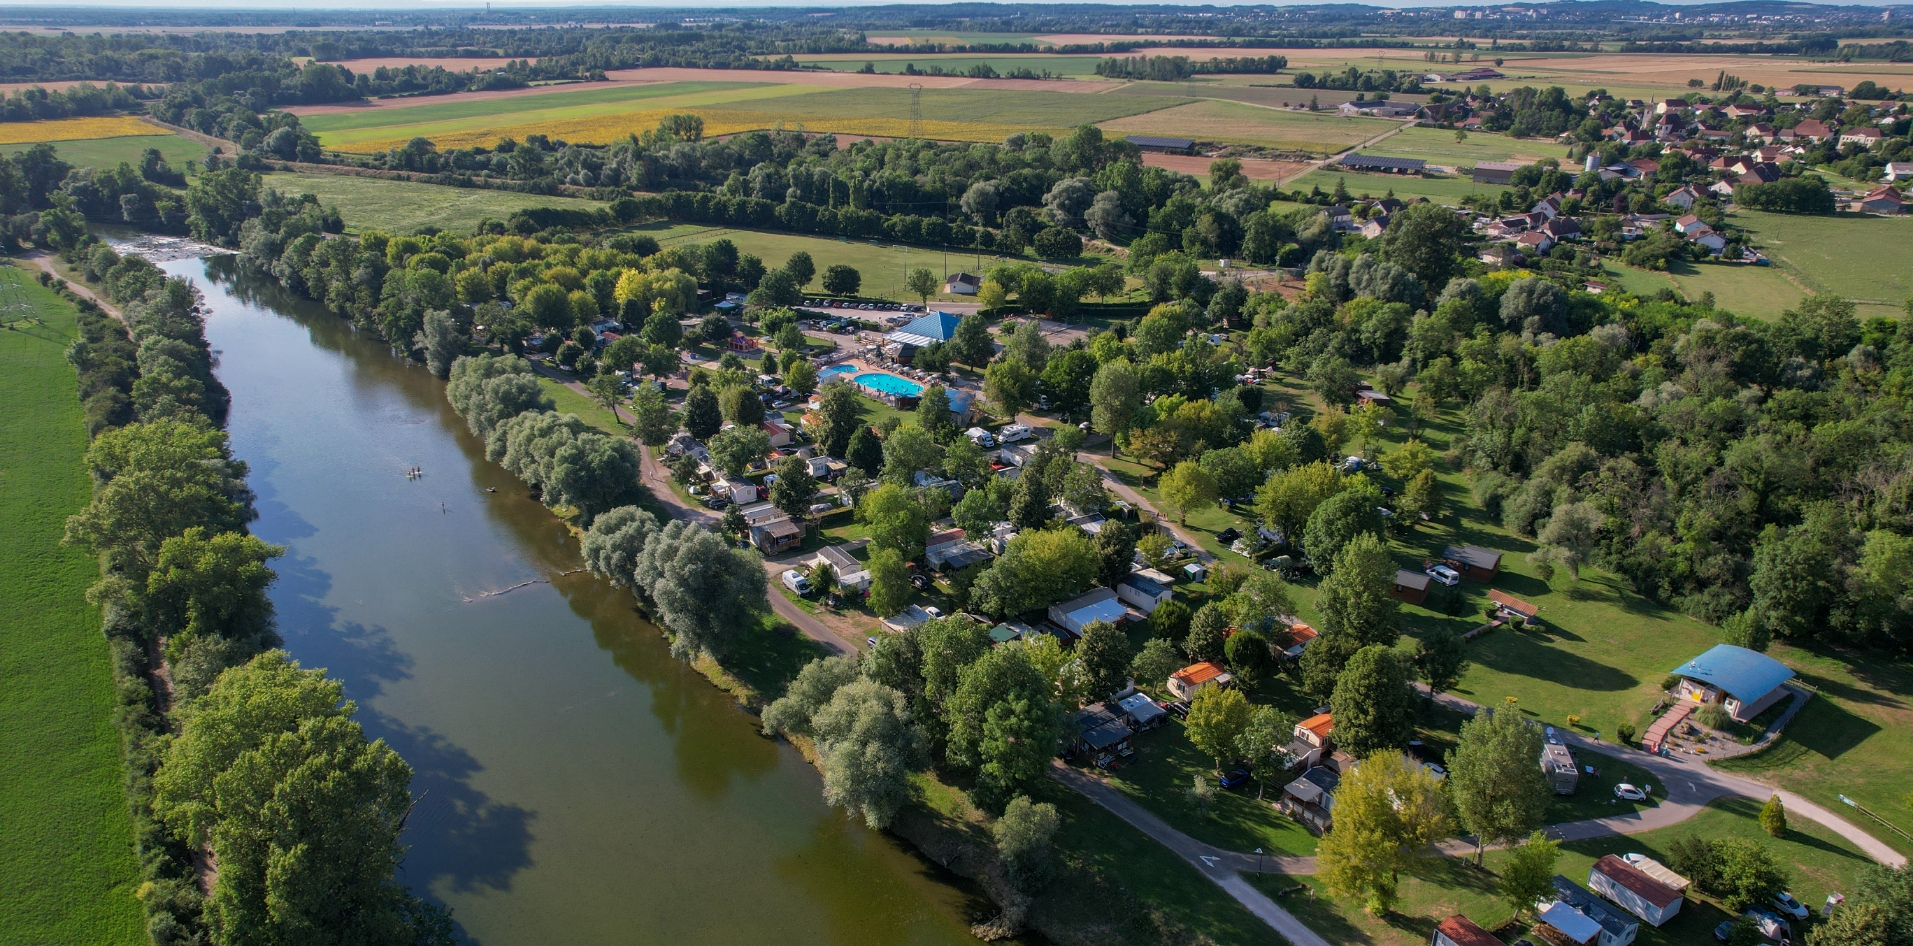 Aerial view of Les Bords de Loue campsite, your campsite in Jura at the heart of a varied landscape of green hills